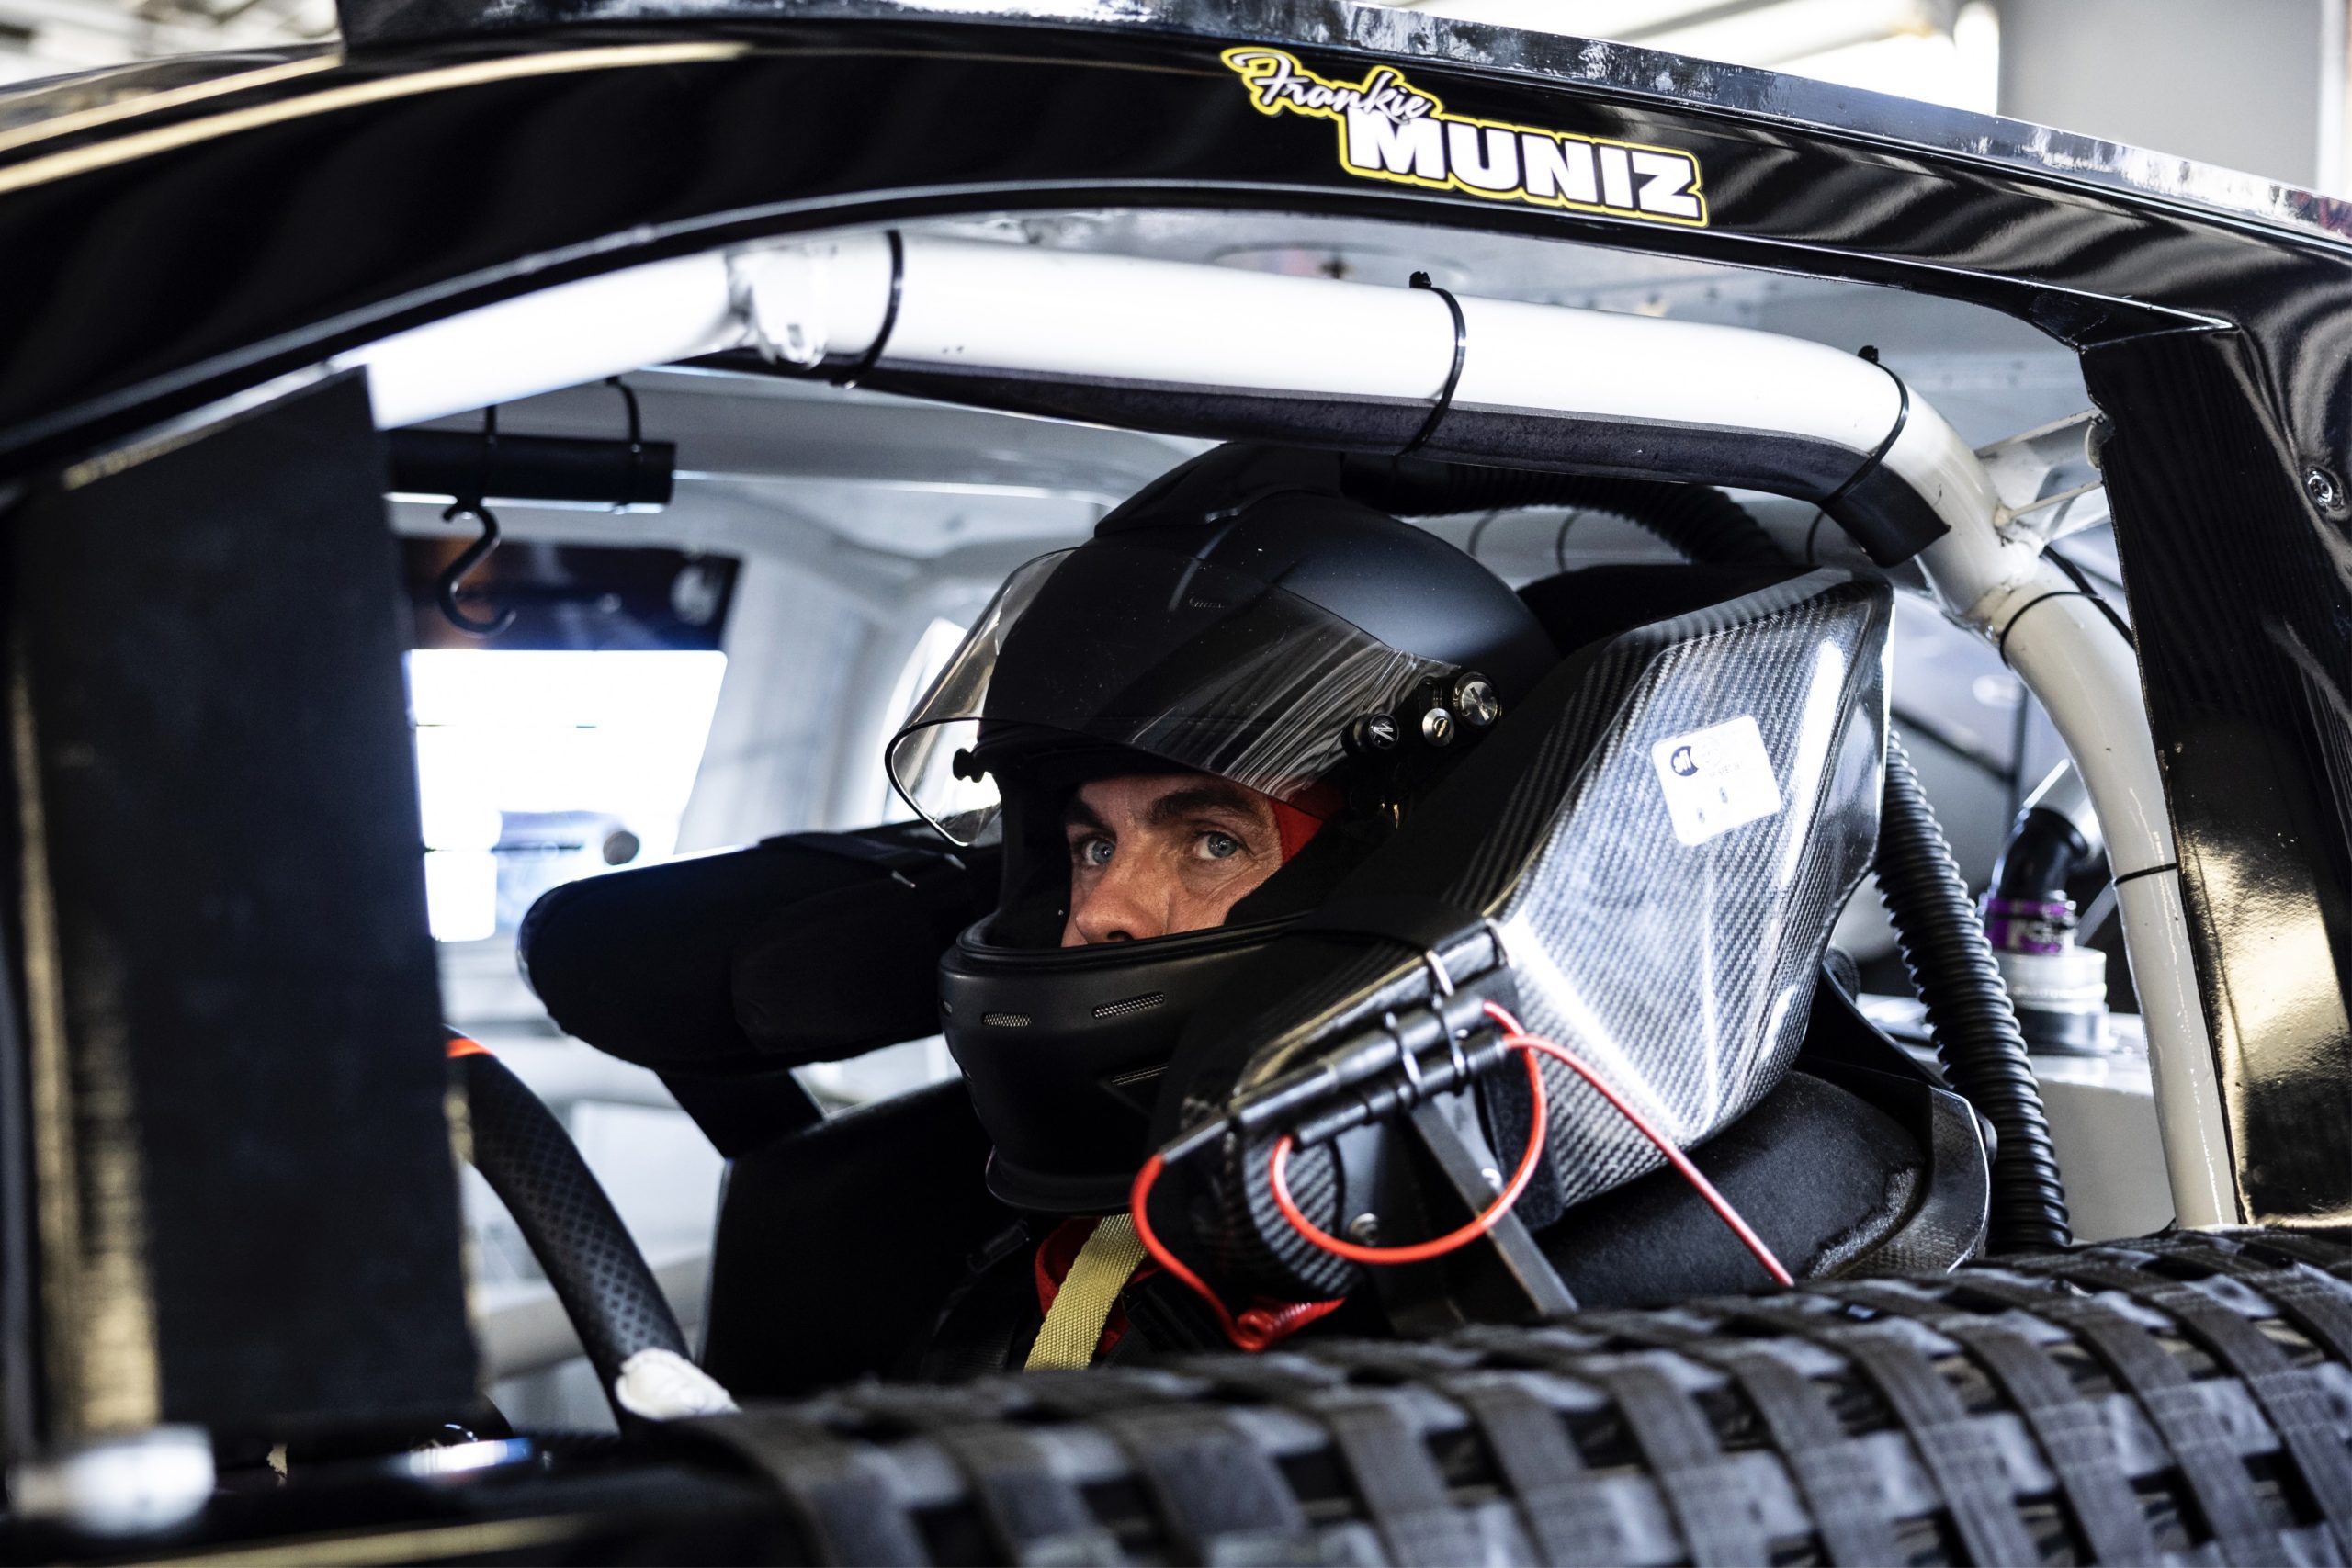 The weight of the connections and memories of the 2001 Daytona 500 have left an impact on ARCA Menards Series driver Frankie Muniz.